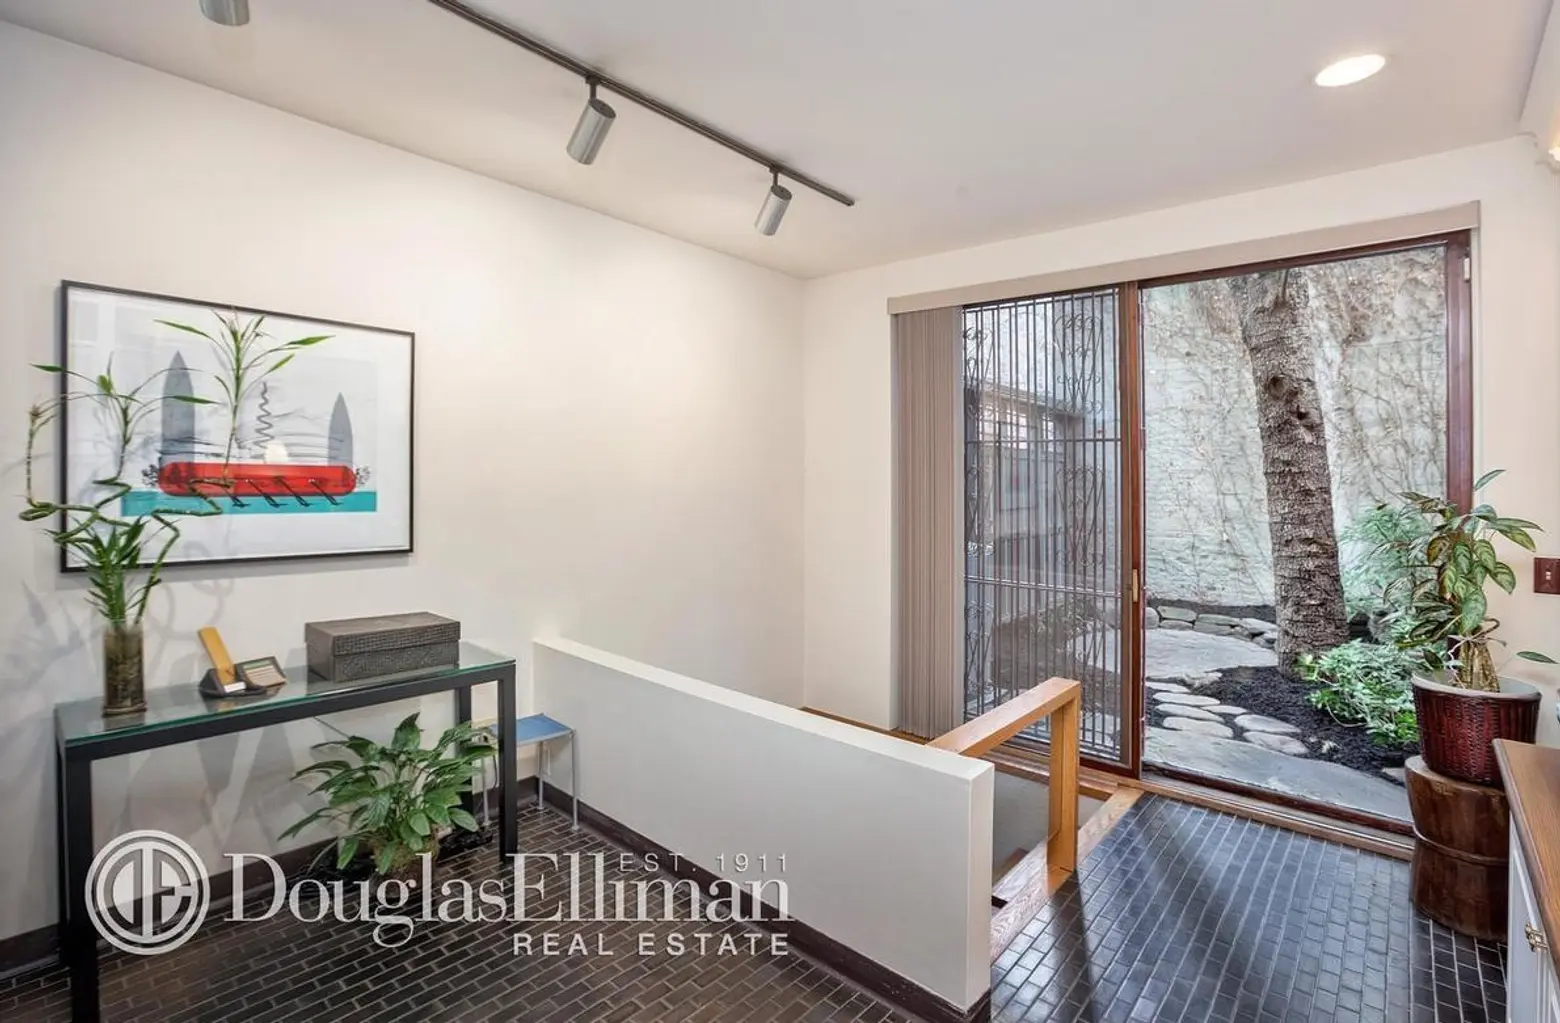 81 Hanson Place, 21 State Street, David Salle, Fort Greene, Brooklyn Heights, Modern townhouse, architecture, cool listings, high low, NYC real estate, brooklyn